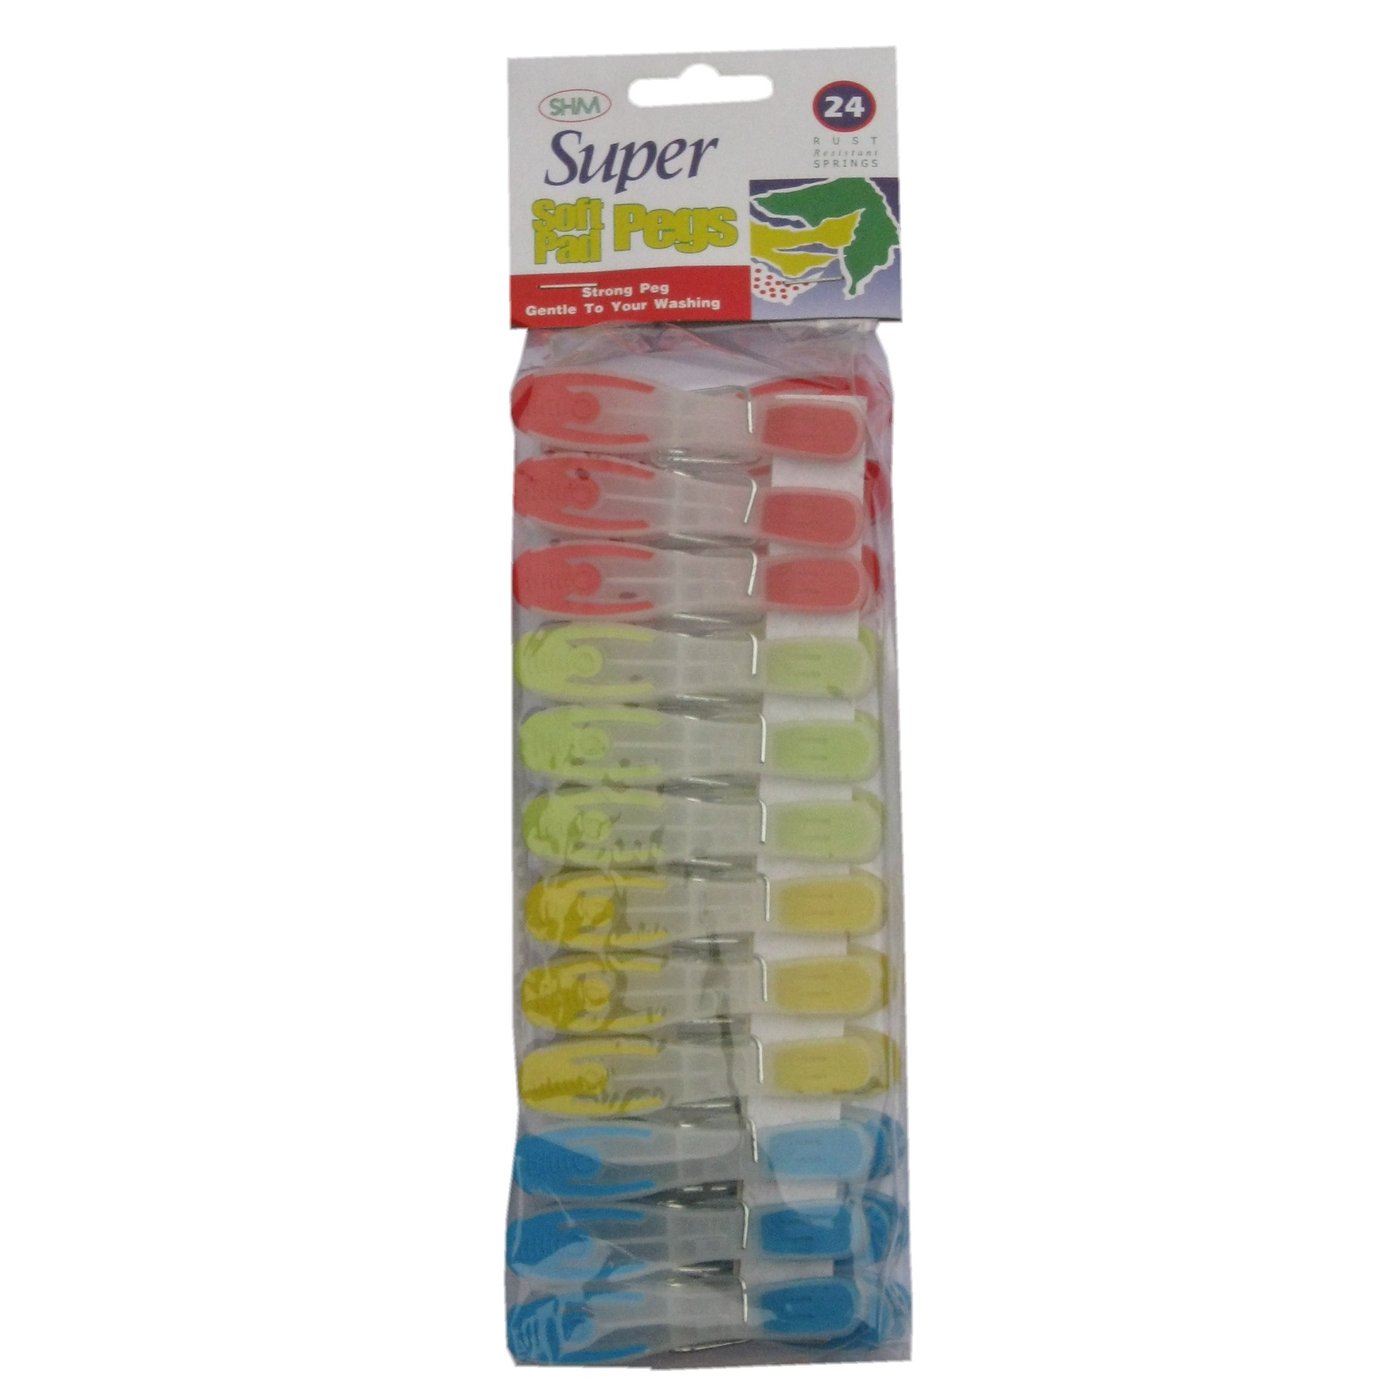 SUPER SOFT PAD CLOTHES PEGS 24 PACK